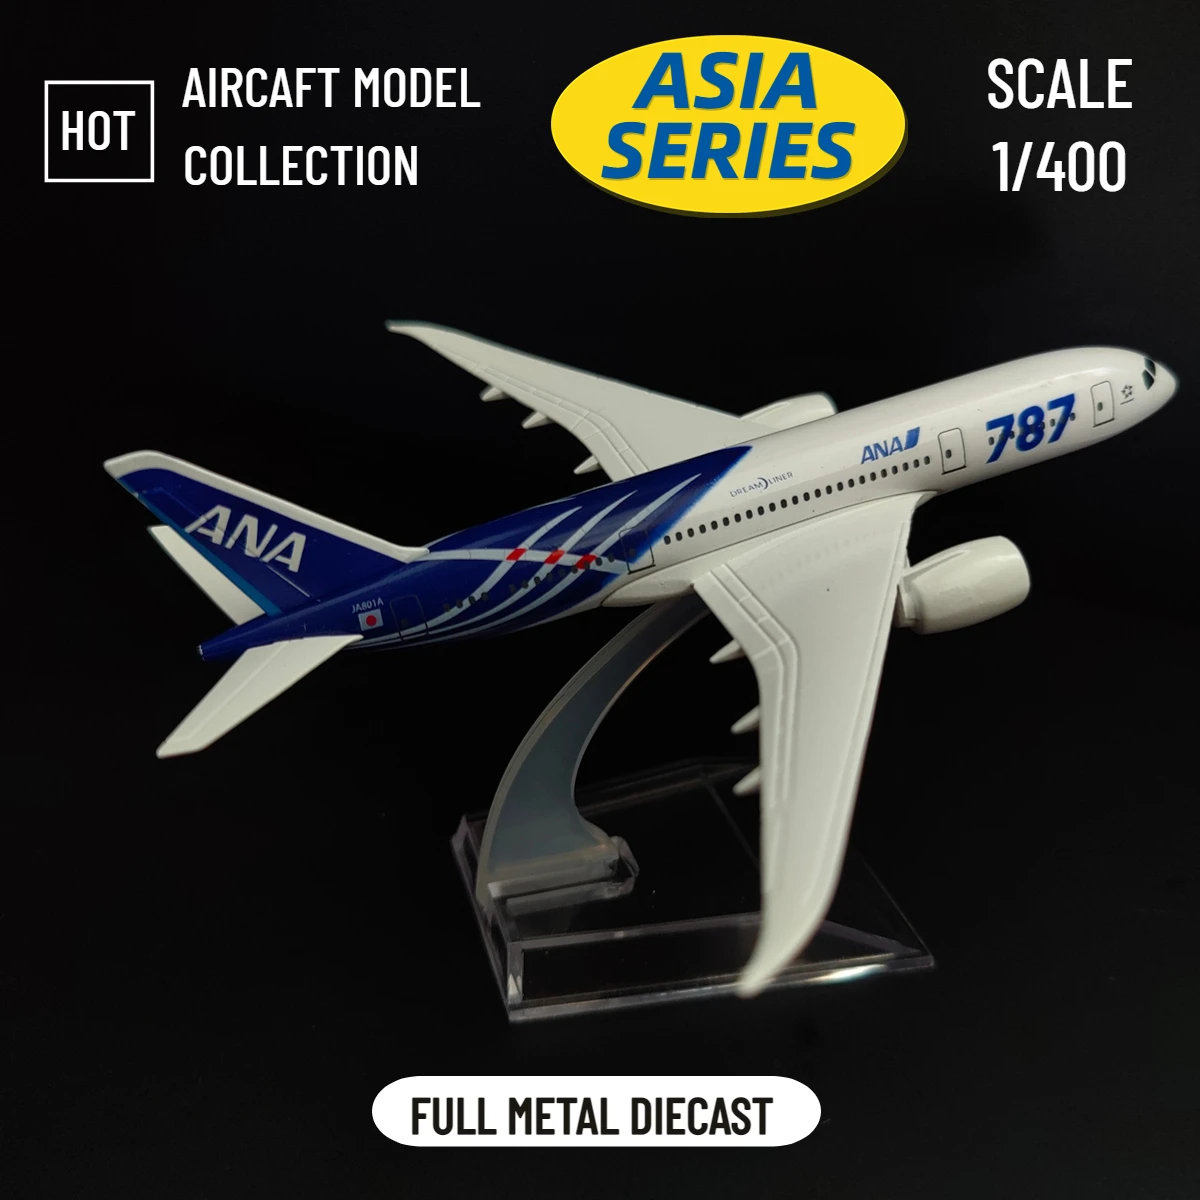 

Scale 1:400 Metal Aviation Replica 15cm Japan ANA 787 Airline Model Airbus Boeing Aircraft Diecast Miniature Toy for Boy Girl